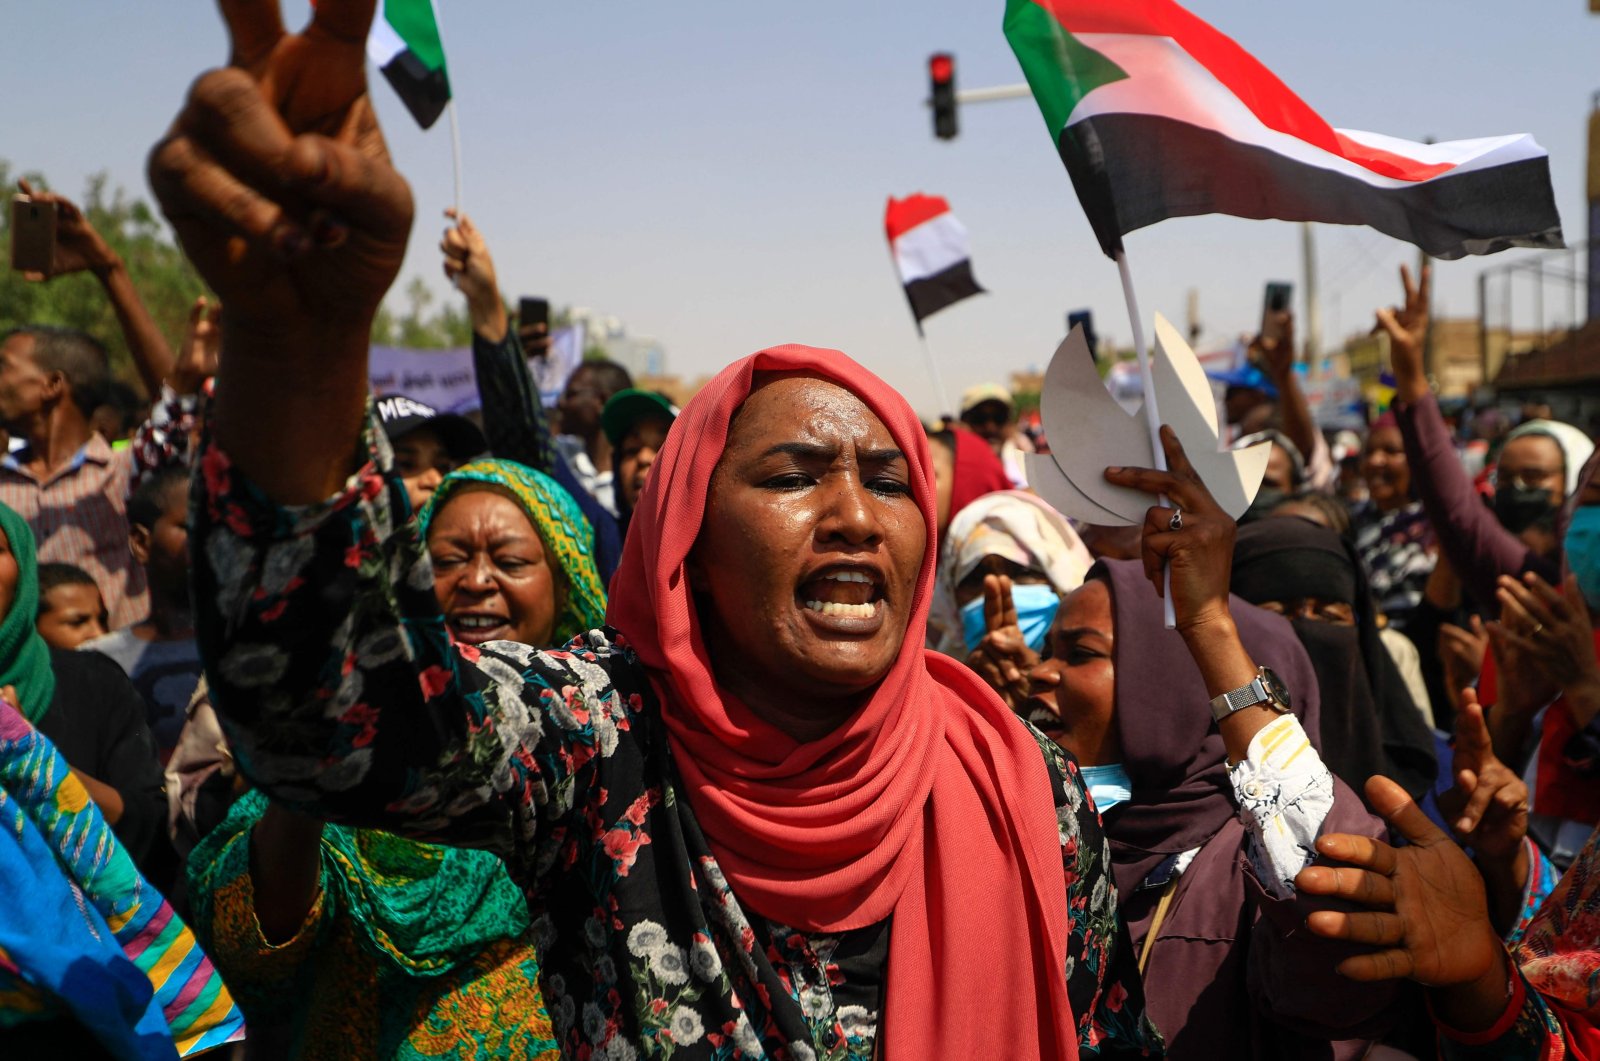 Demonstrators take to the streets to demand the Sudanese government's transition to civilian rule, in Khartoum, Sudan, Oct. 21, 2021. (AFP Photo)